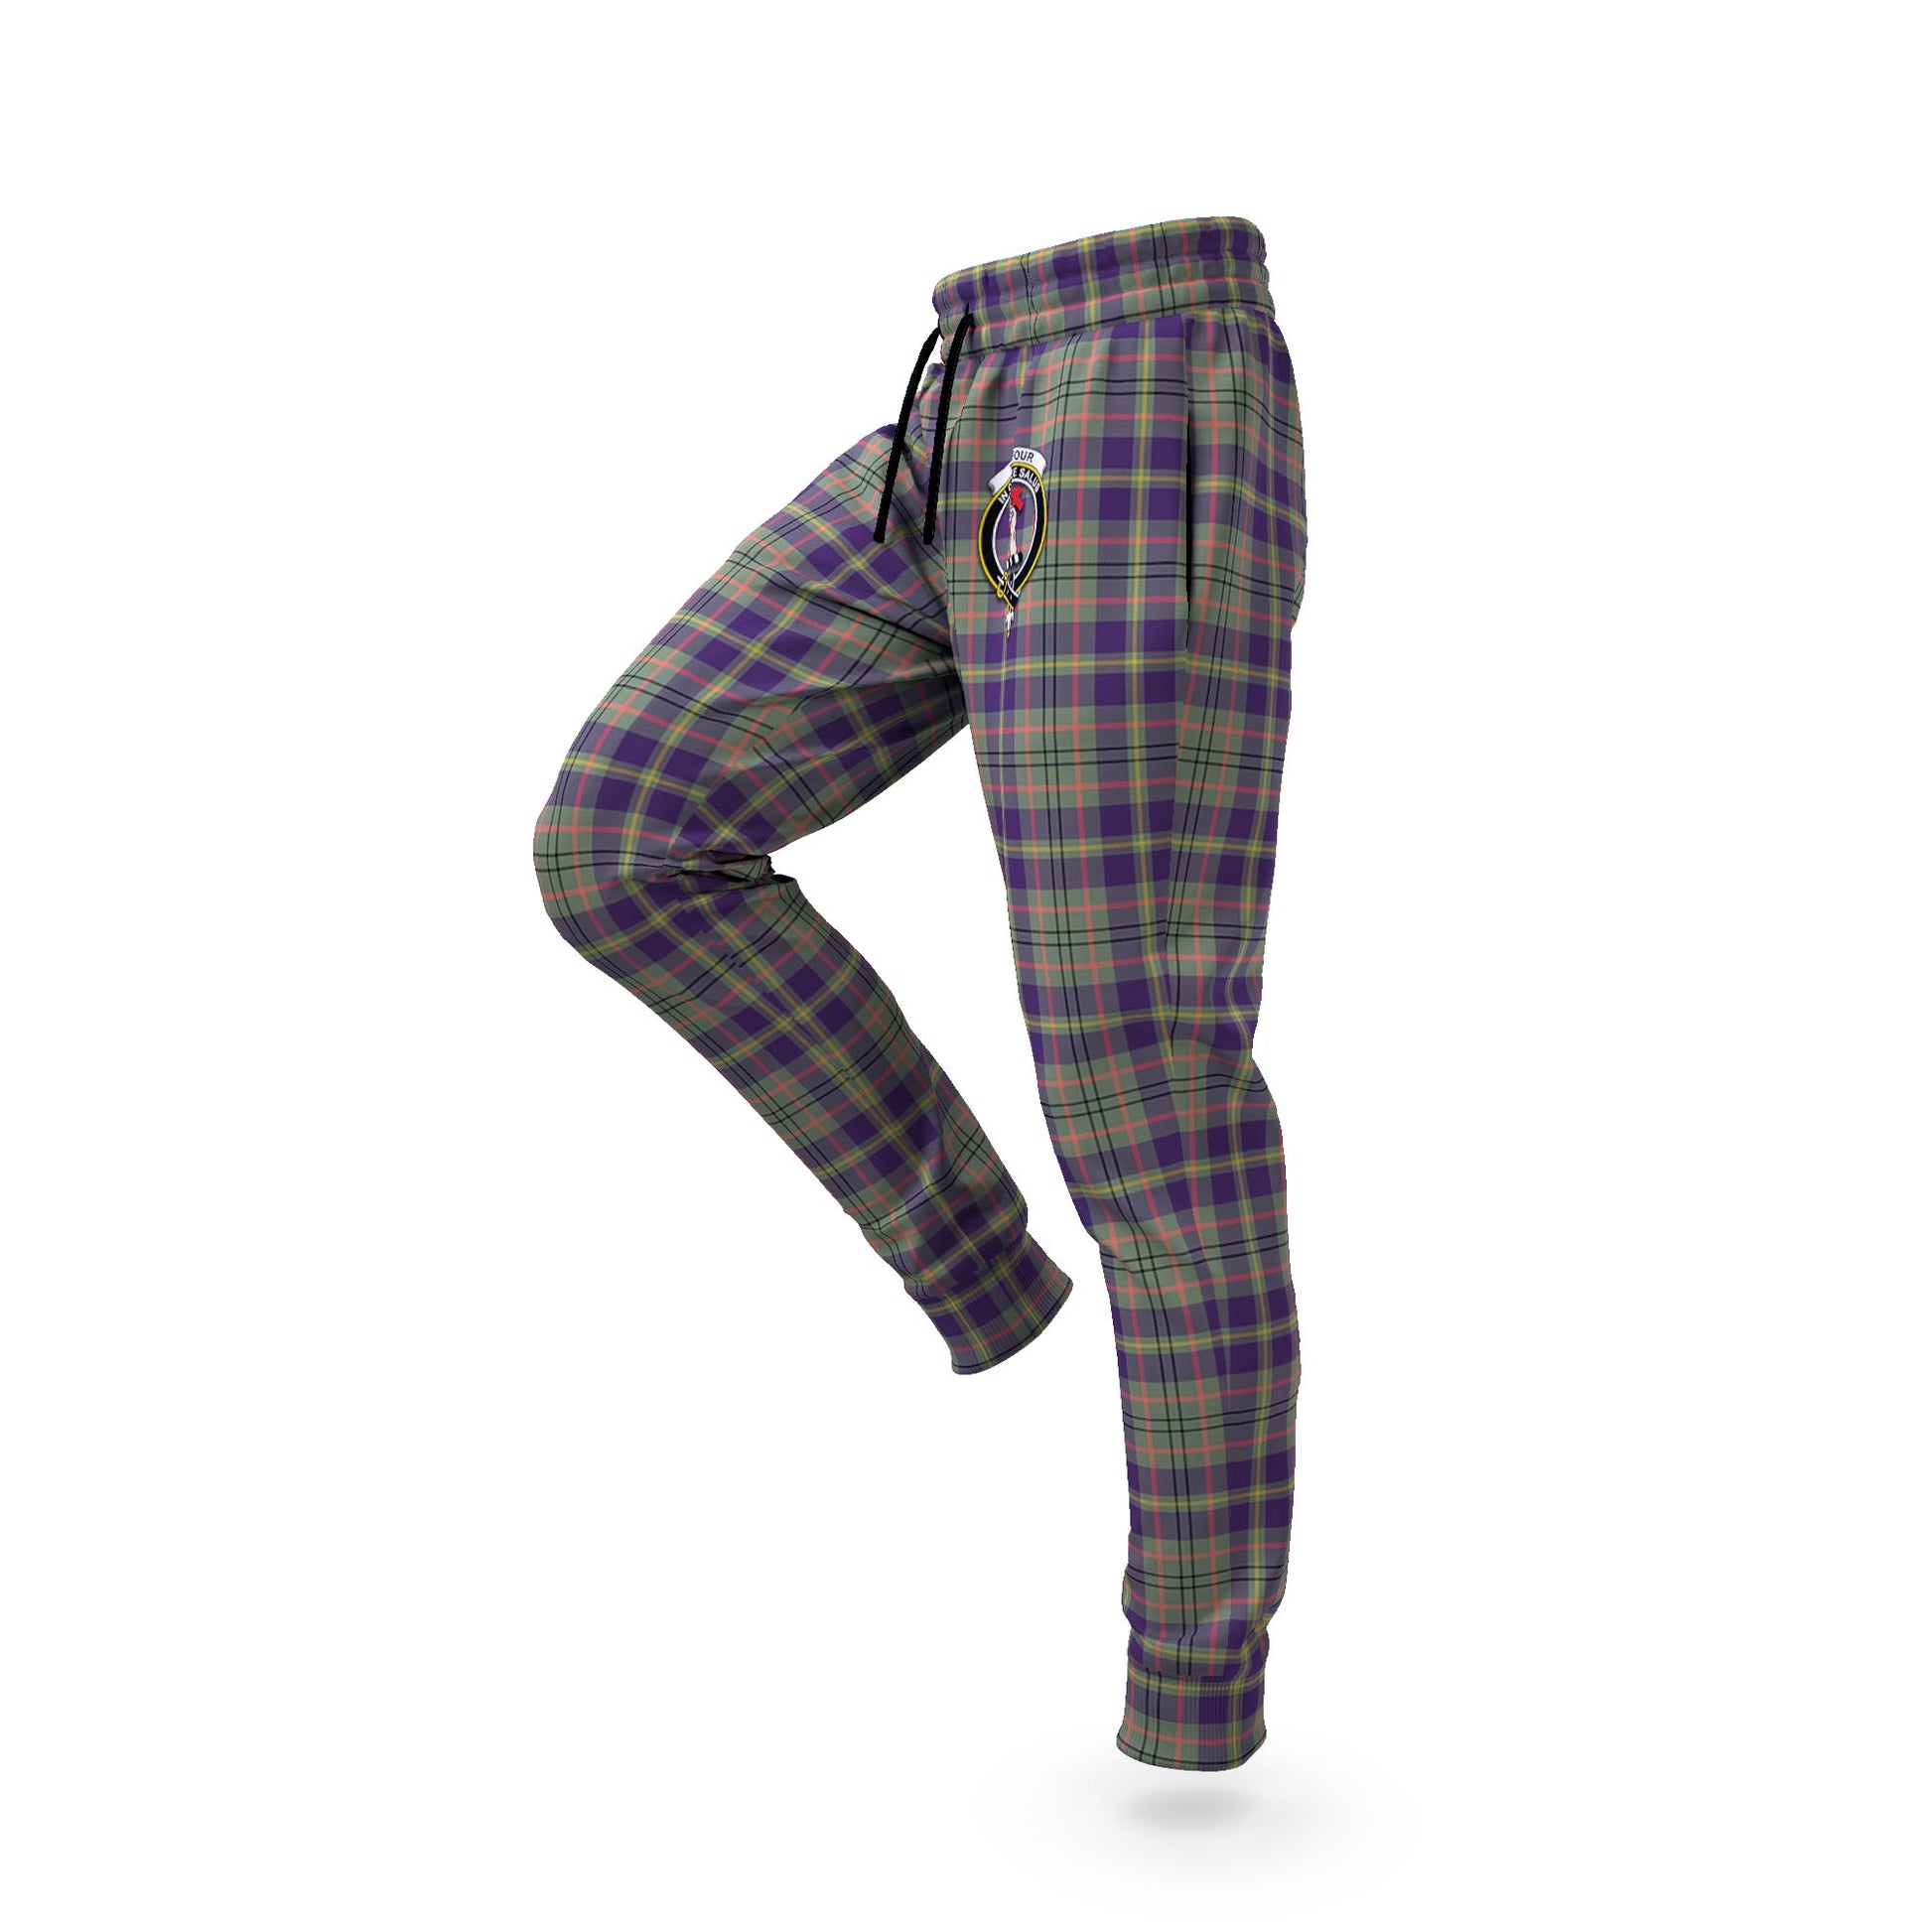 Taylor Weathered Tartan Joggers Pants with Family Crest S - Tartanvibesclothing Shop